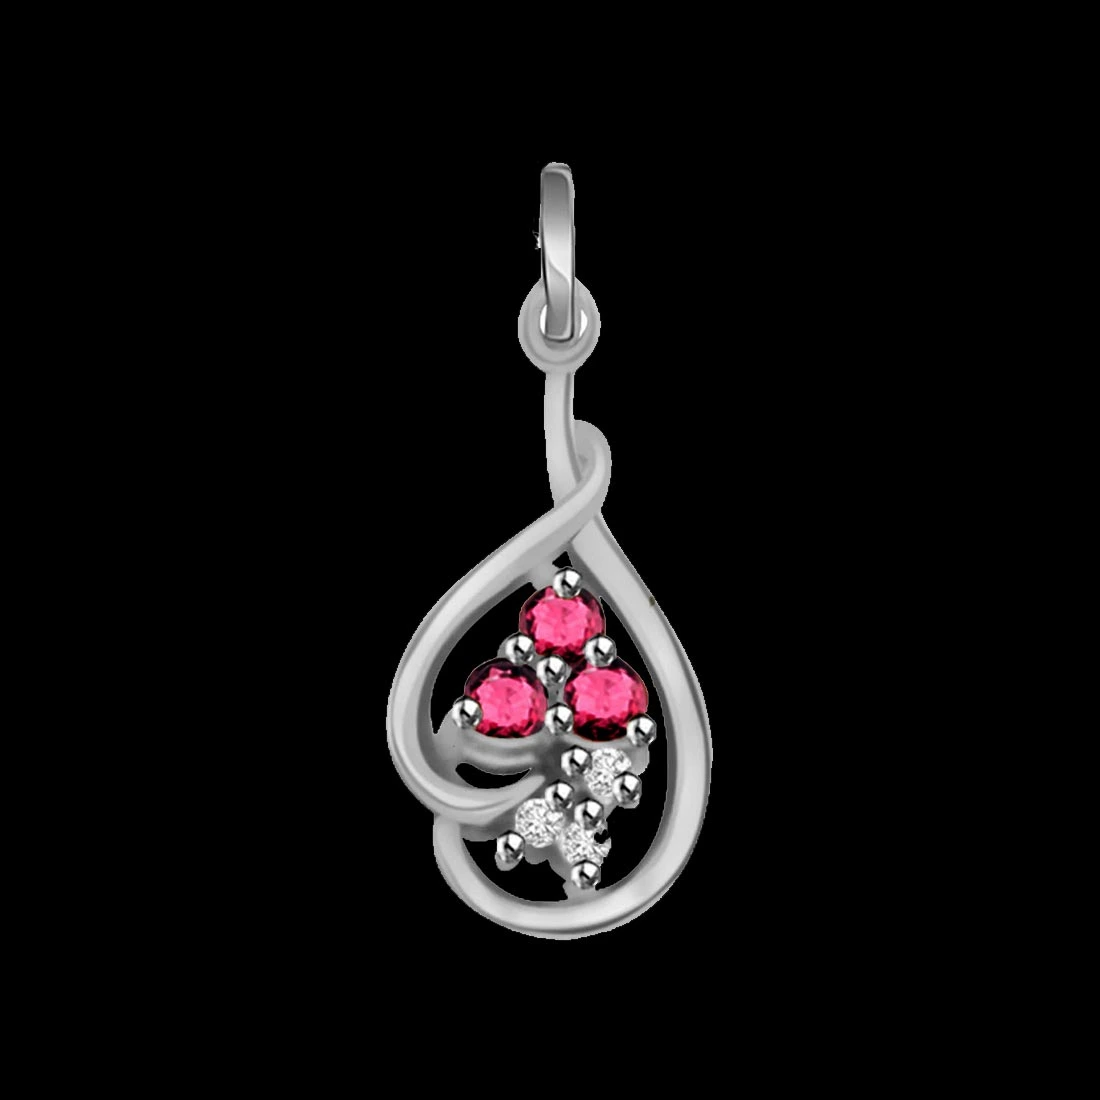 Trinking Love - Real Diamond, Red Ruby & Sterling Silver Pendant with 18 IN Chain (SDP173)